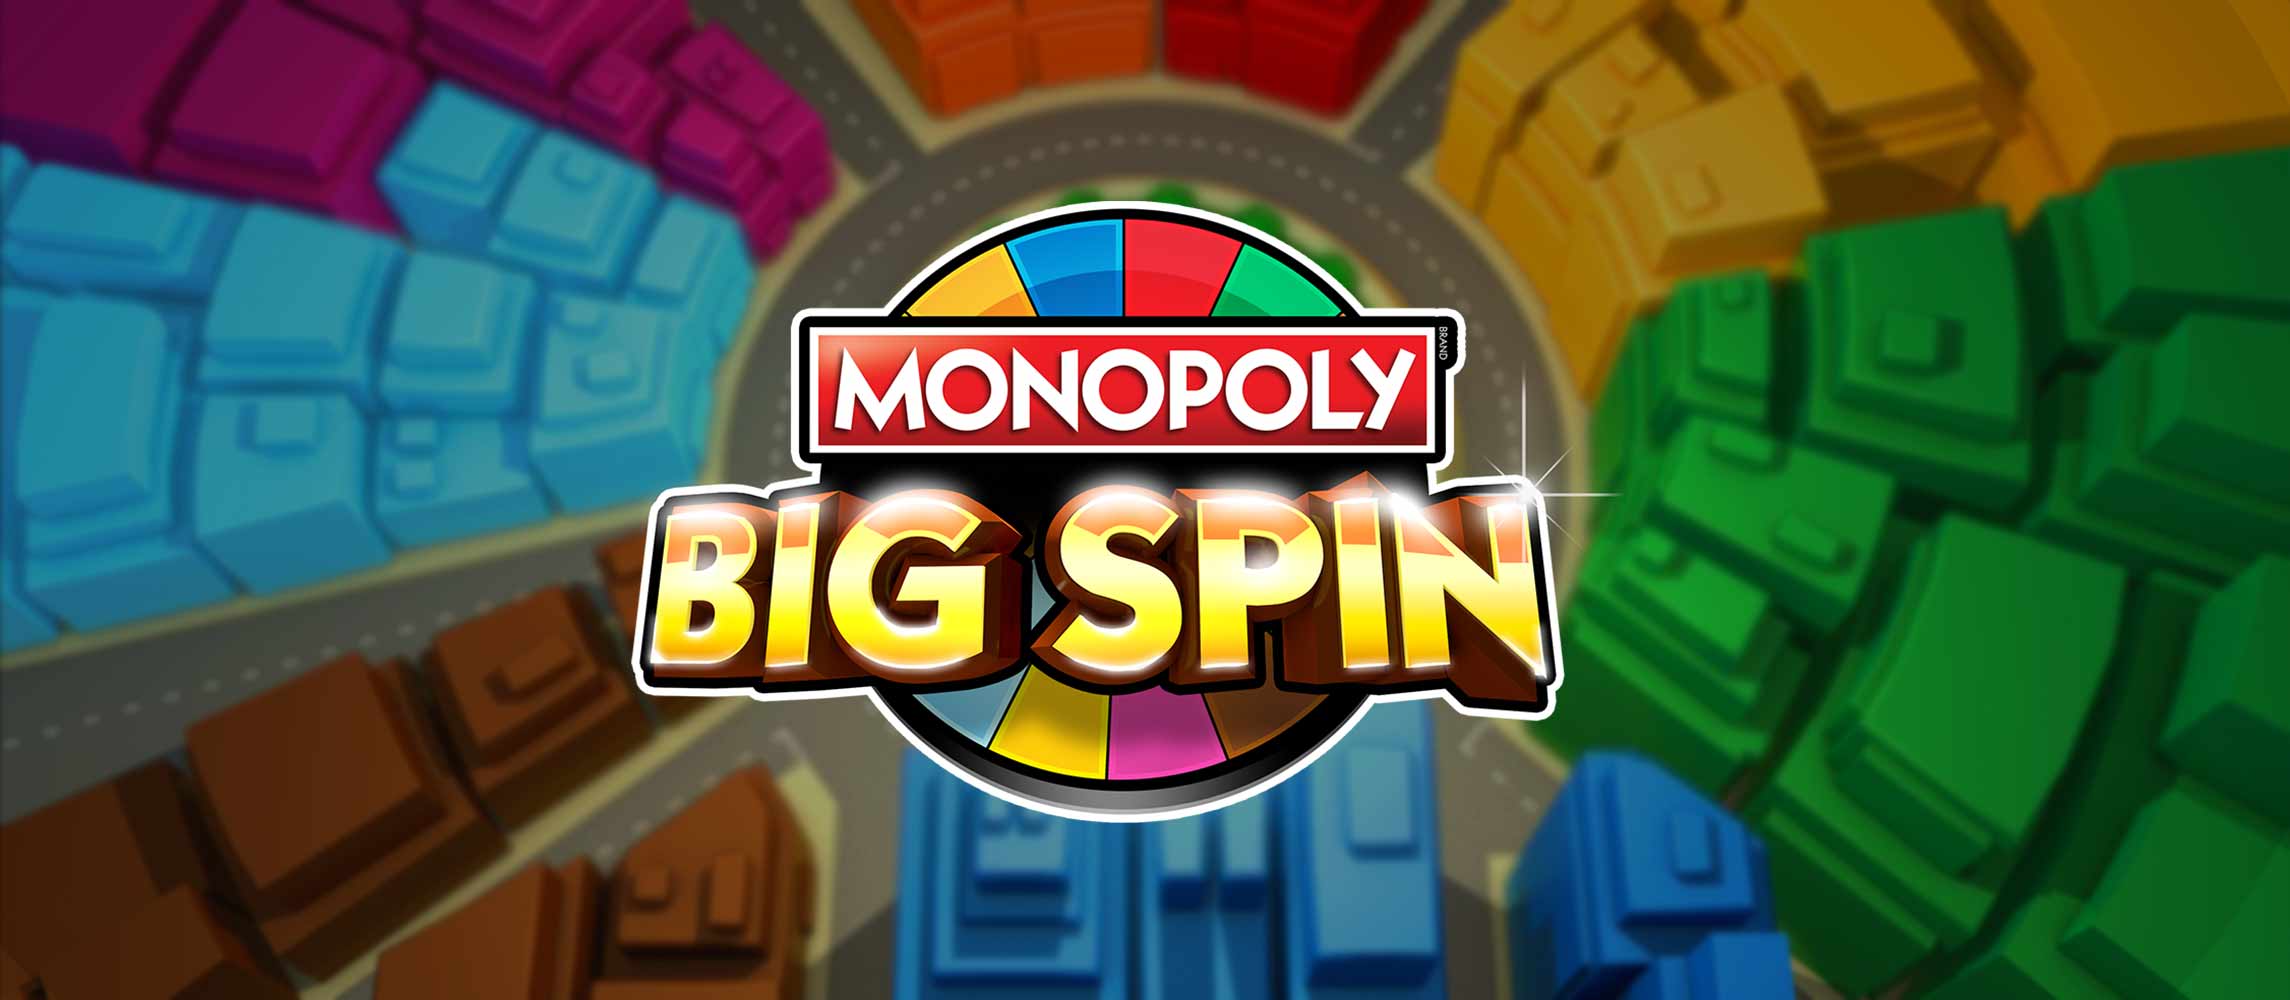 Monopoly Big Spin by Shuffle Master